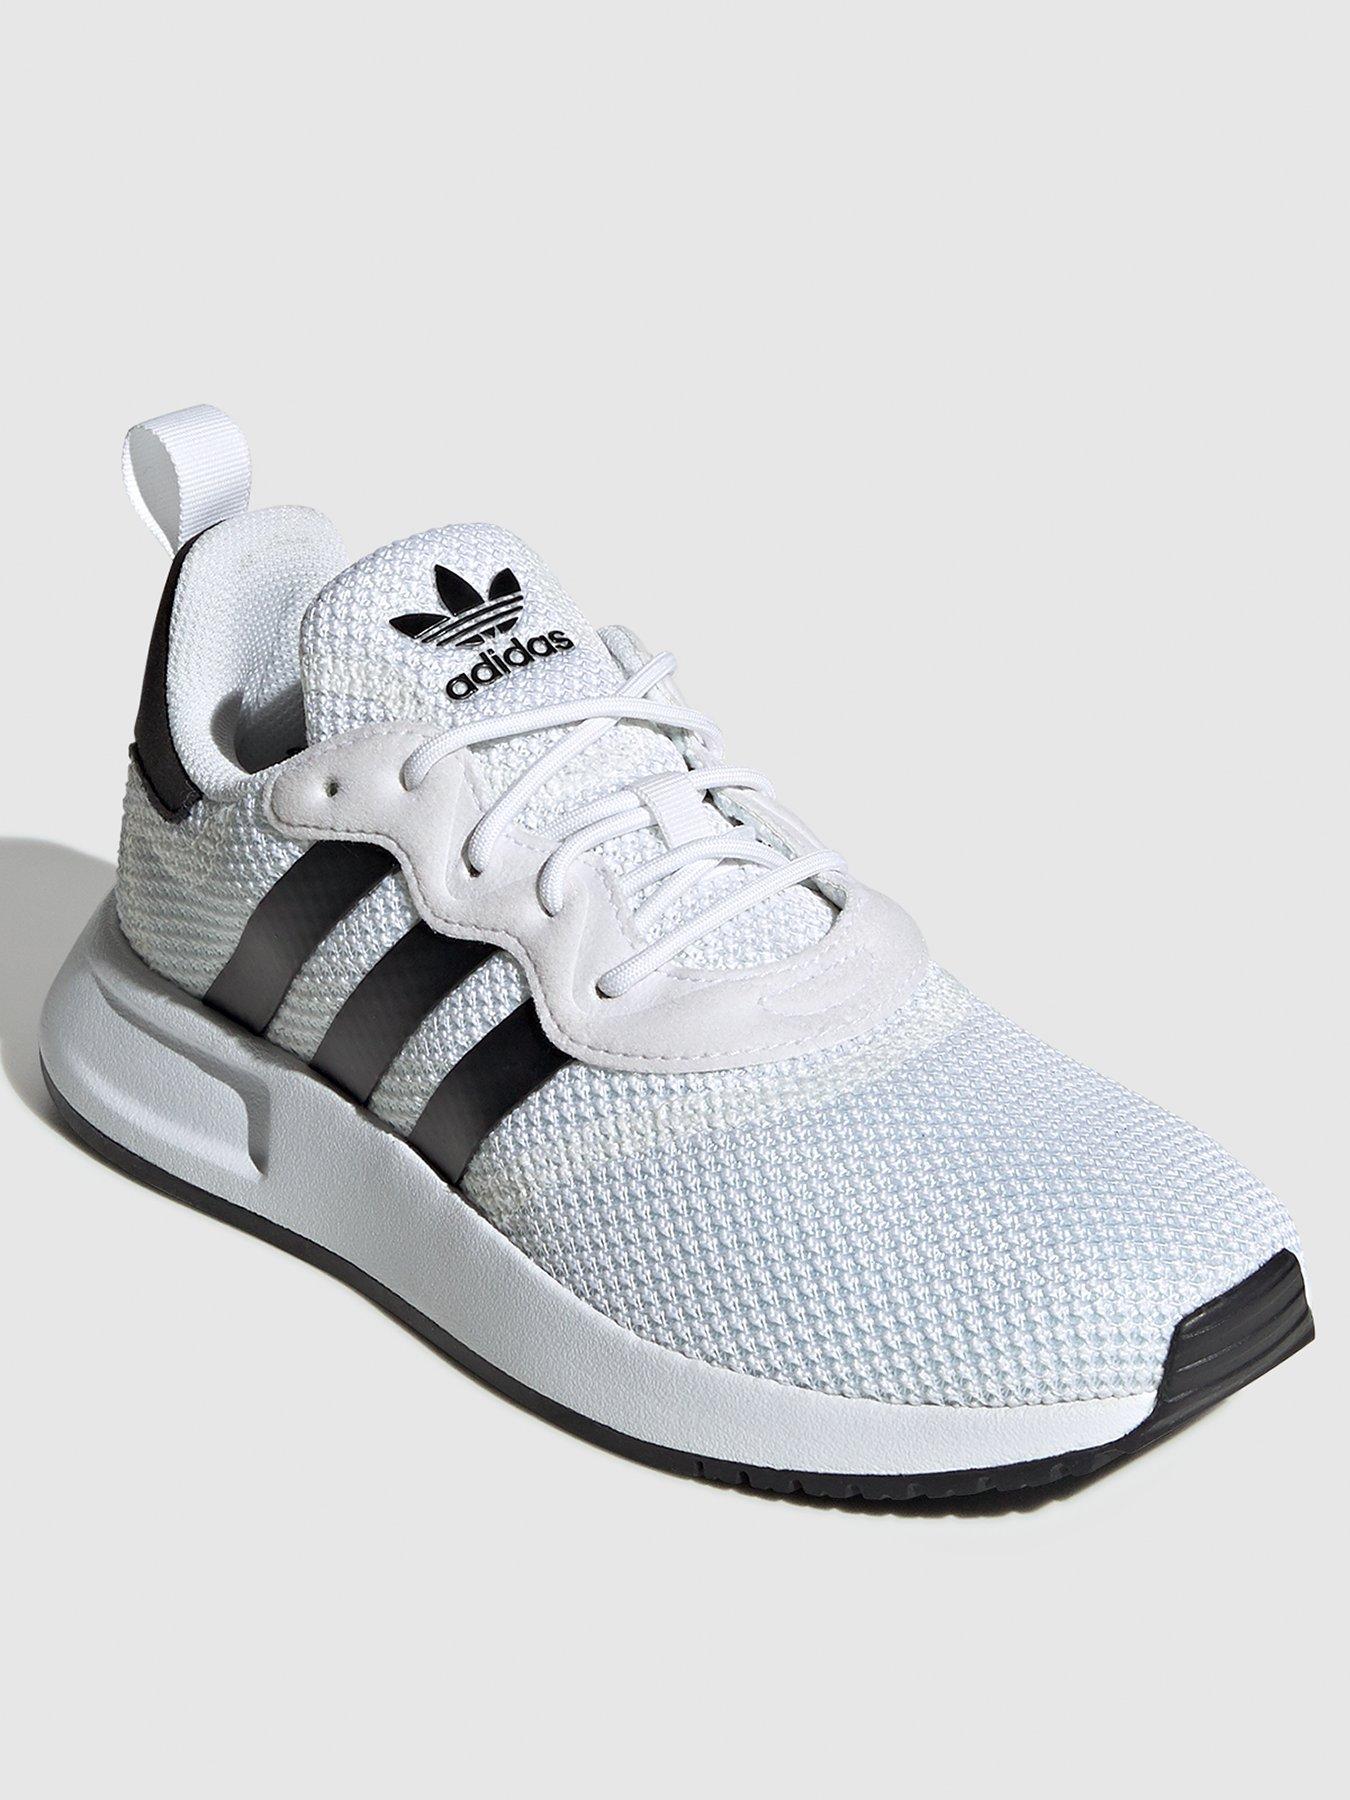 adidas black and white x_plr trainers